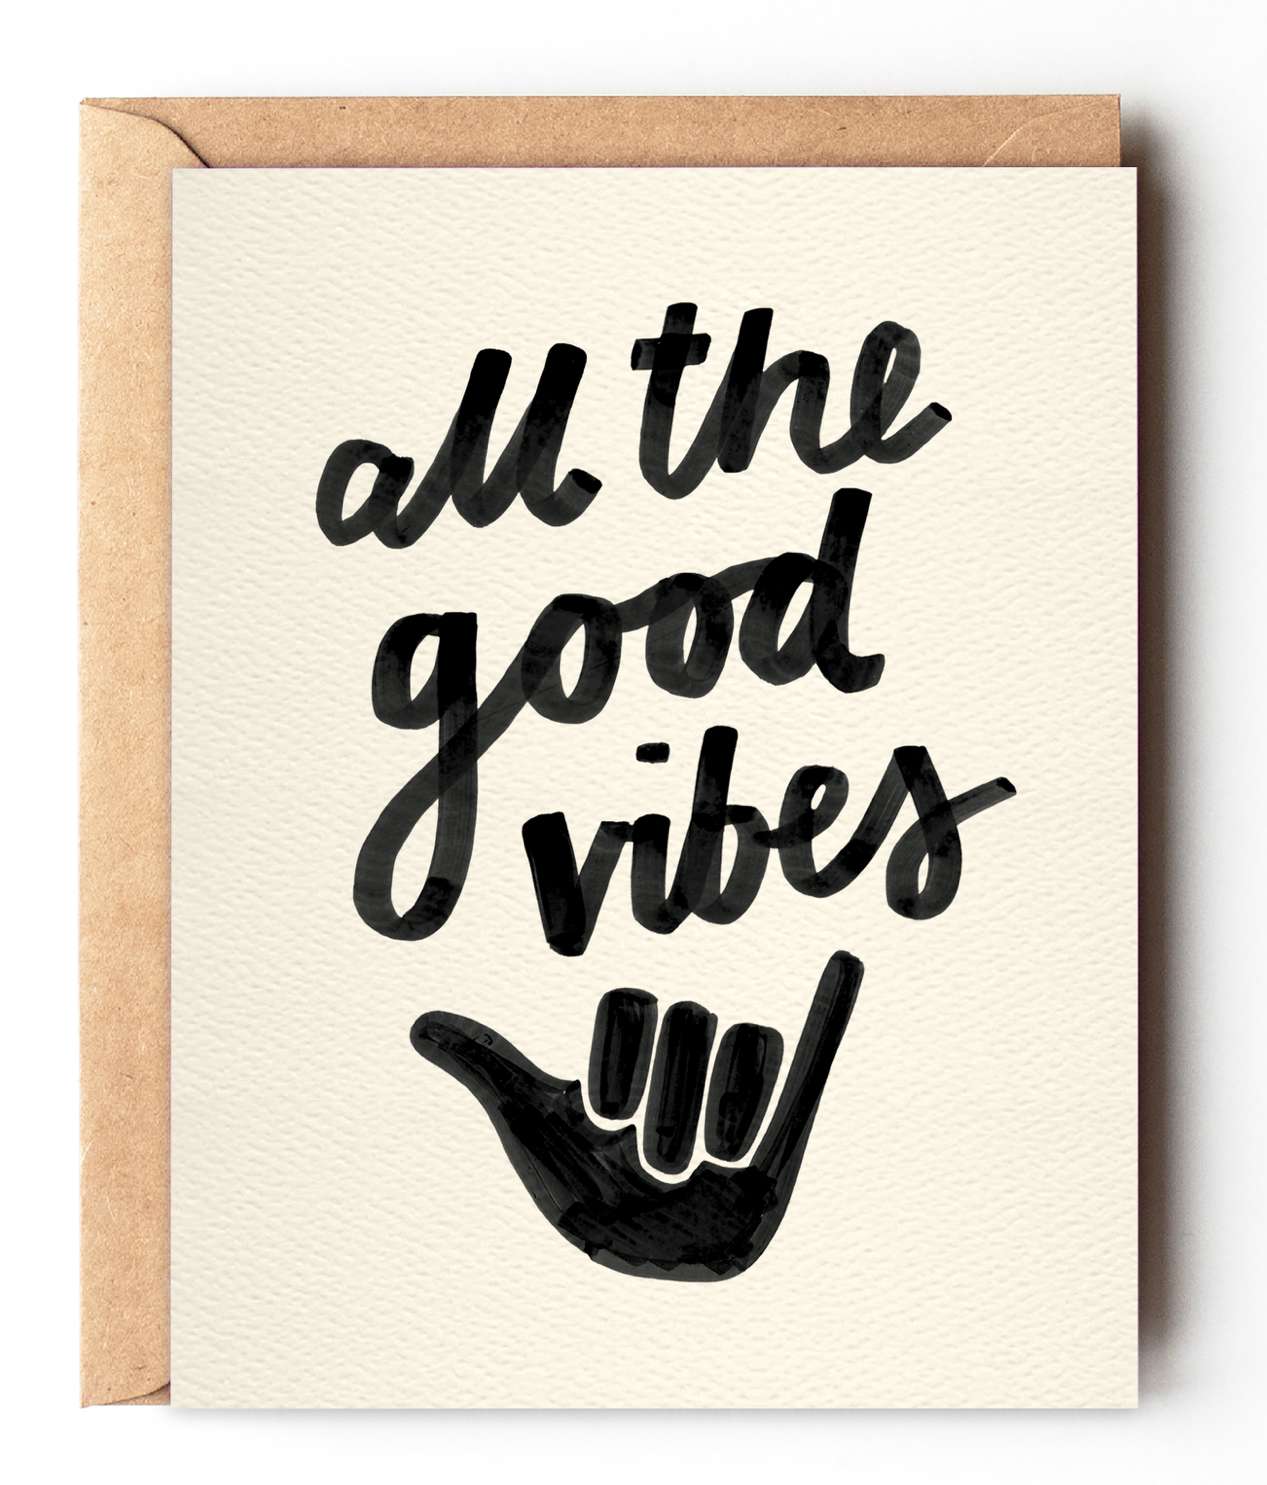 All The Good Vibes - Uplifting Shaka Everyday Card - A fun, uplifting card featuring hand drawn font and shaka. Send some beach vibes with this versatile everyday card.  -Size: 4.25&quot; x 5.5&quot; -Digital print on a quality, felt textured card  -100% recycled envelope  -Packed in an eco-friendly biodegradable clear sleeve 